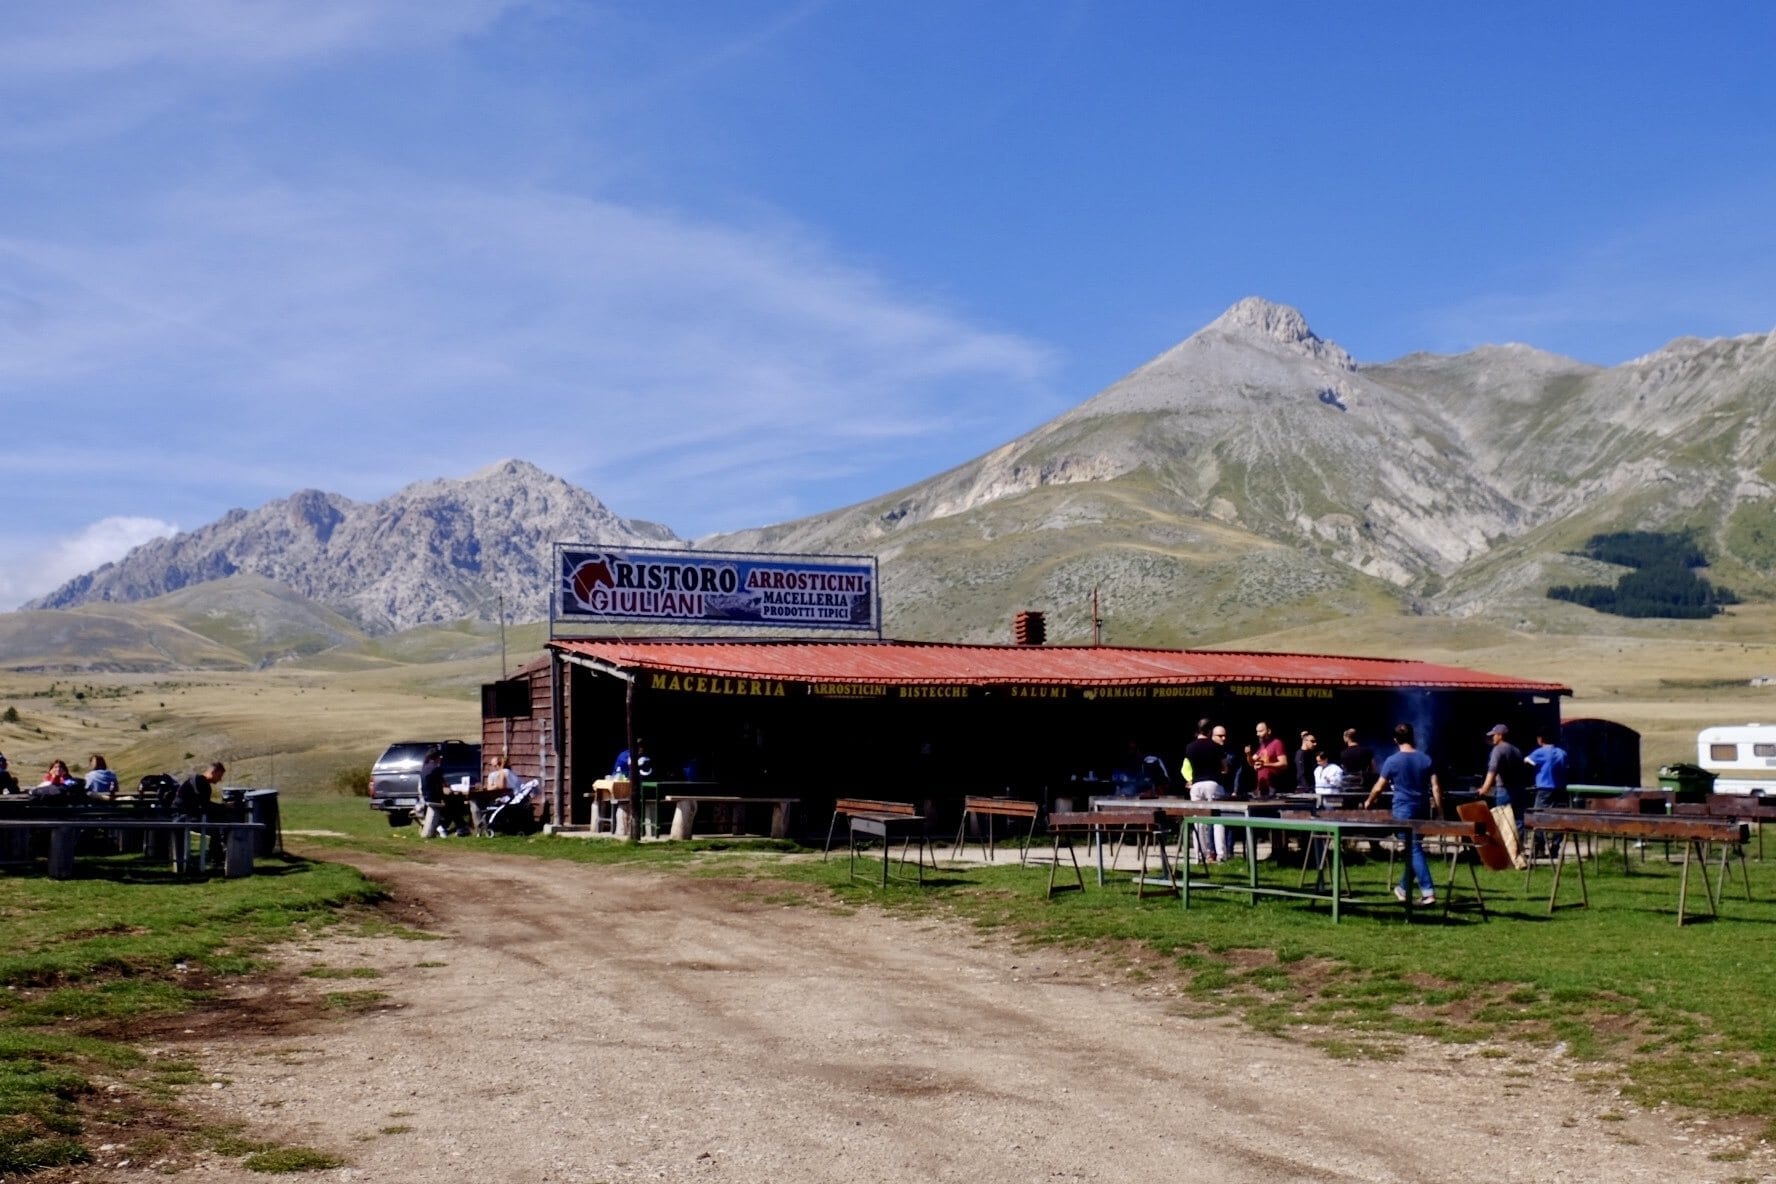 A butcher shop with smoking grills in front of it, in the middle of nowhere in Abruzzo, Italy. Incredible mountains rise in the background underneath a blue sky.